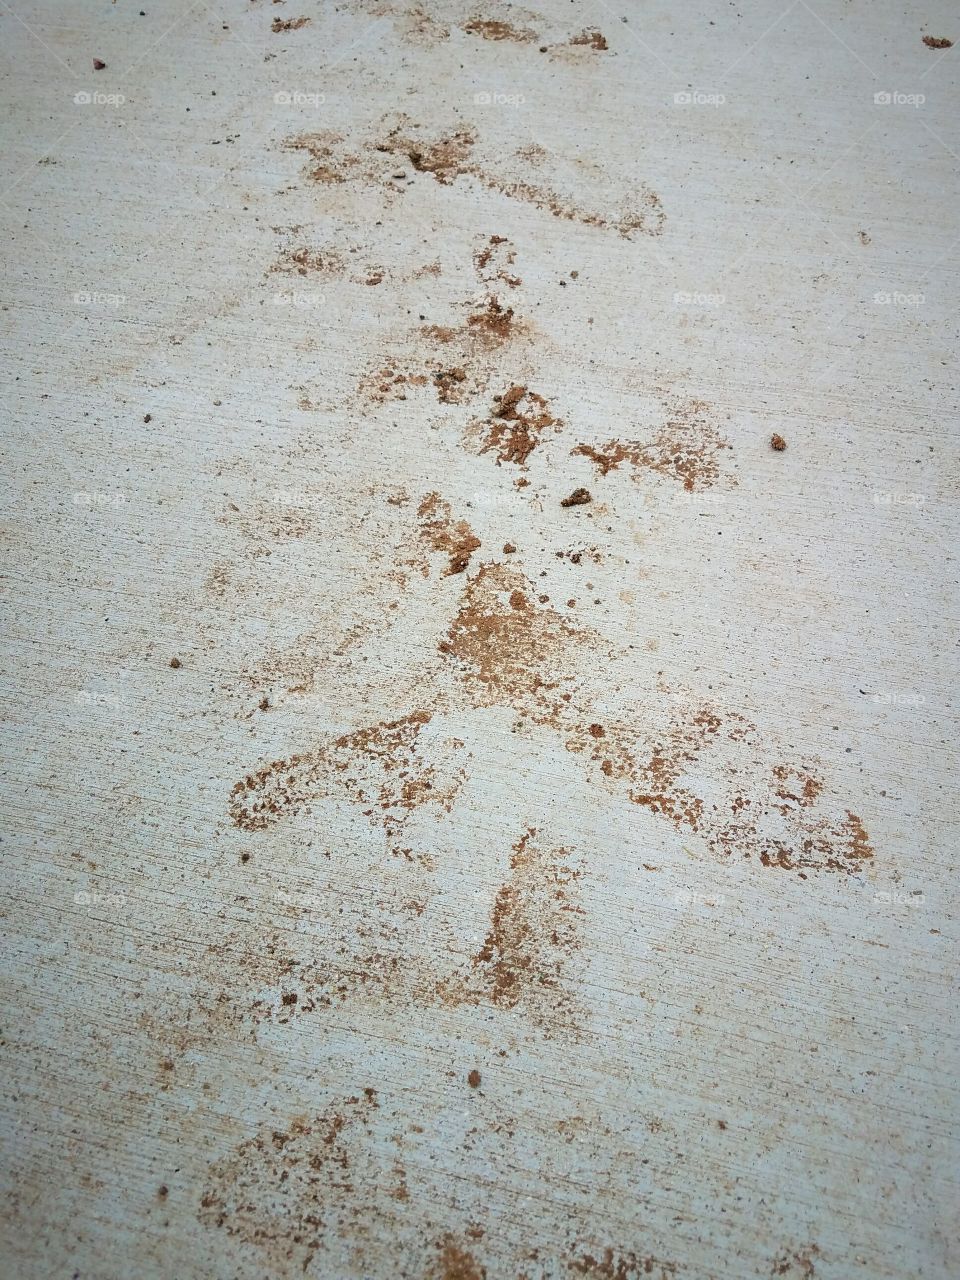 Mud track on cement